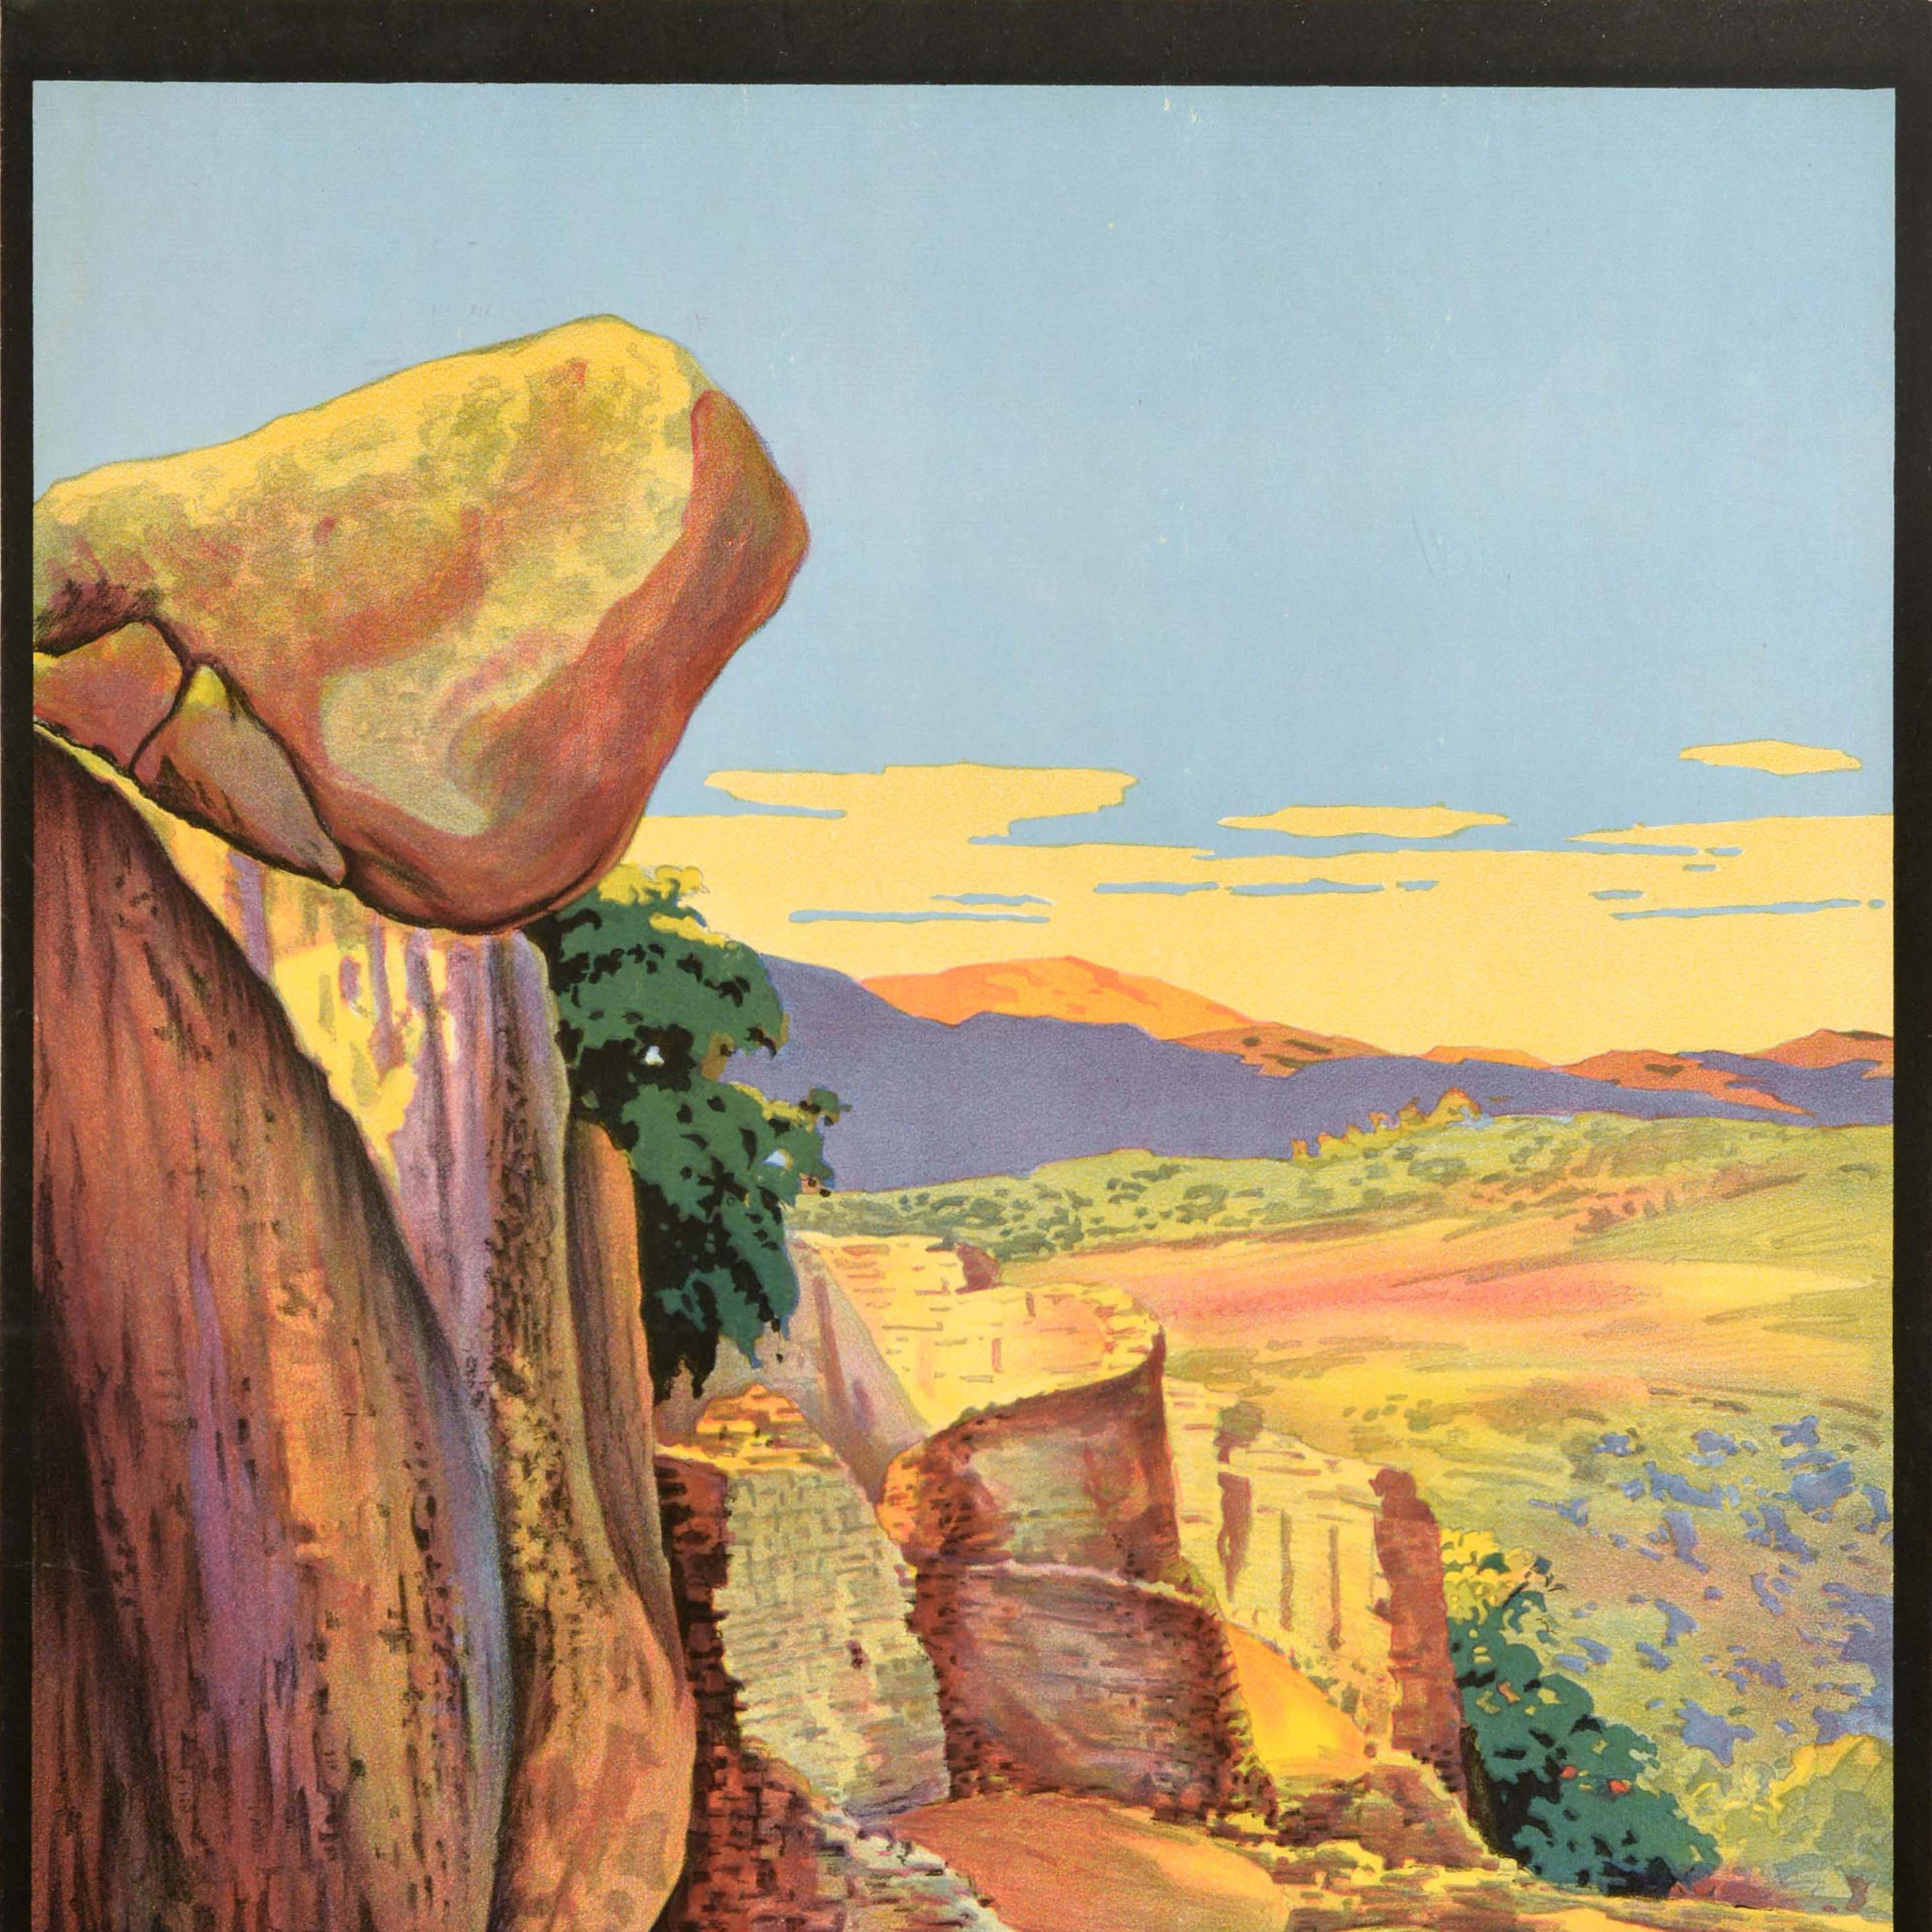 Original vintage Africa travel poster for Zimbabwe Southern Rhodesia featuring a stunning scenic view by William George Bevington (1881-1953) depicting rocks and the ruins of the ancient 11th-15th century city stone walls with trees and hills in the